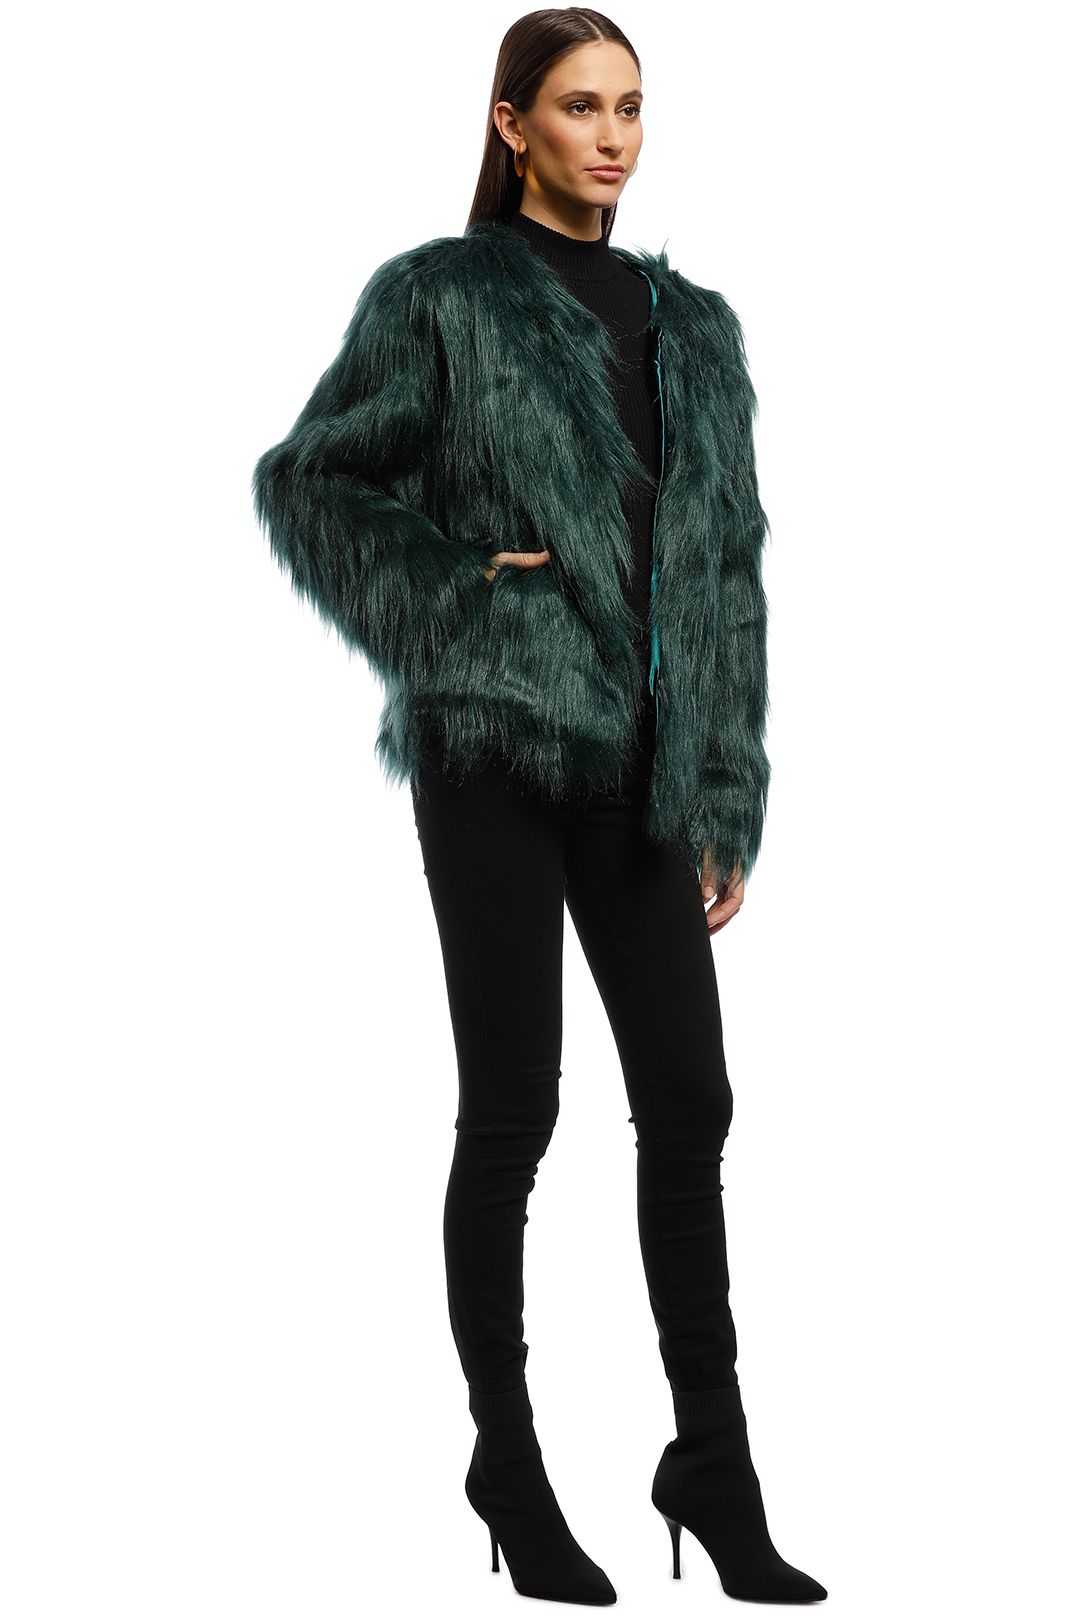 Everly - Marmont Faux Fur Jacket - Forest Green - Side